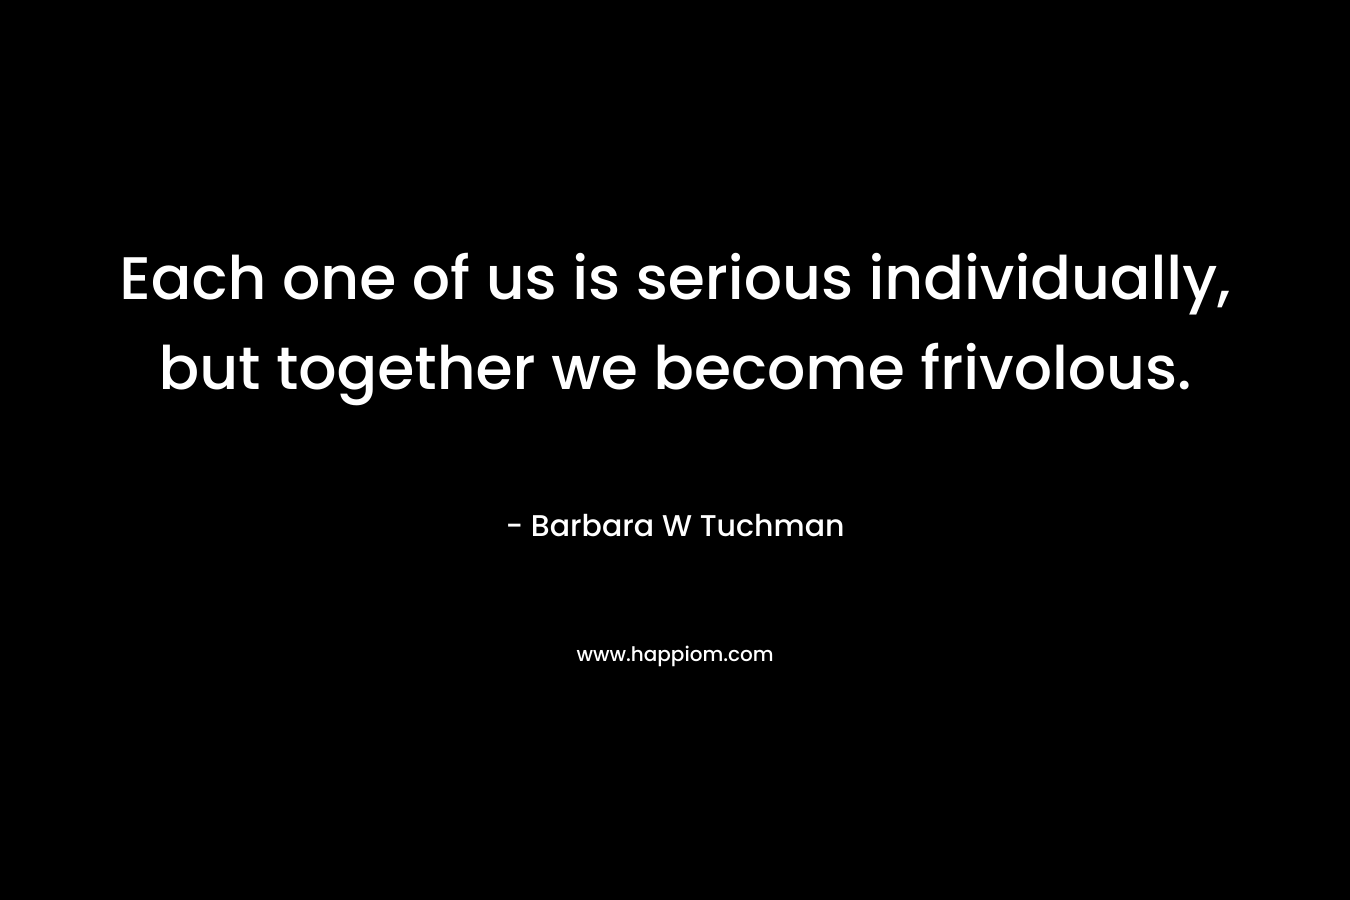 Each one of us is serious individually, but together we become frivolous. – Barbara W Tuchman